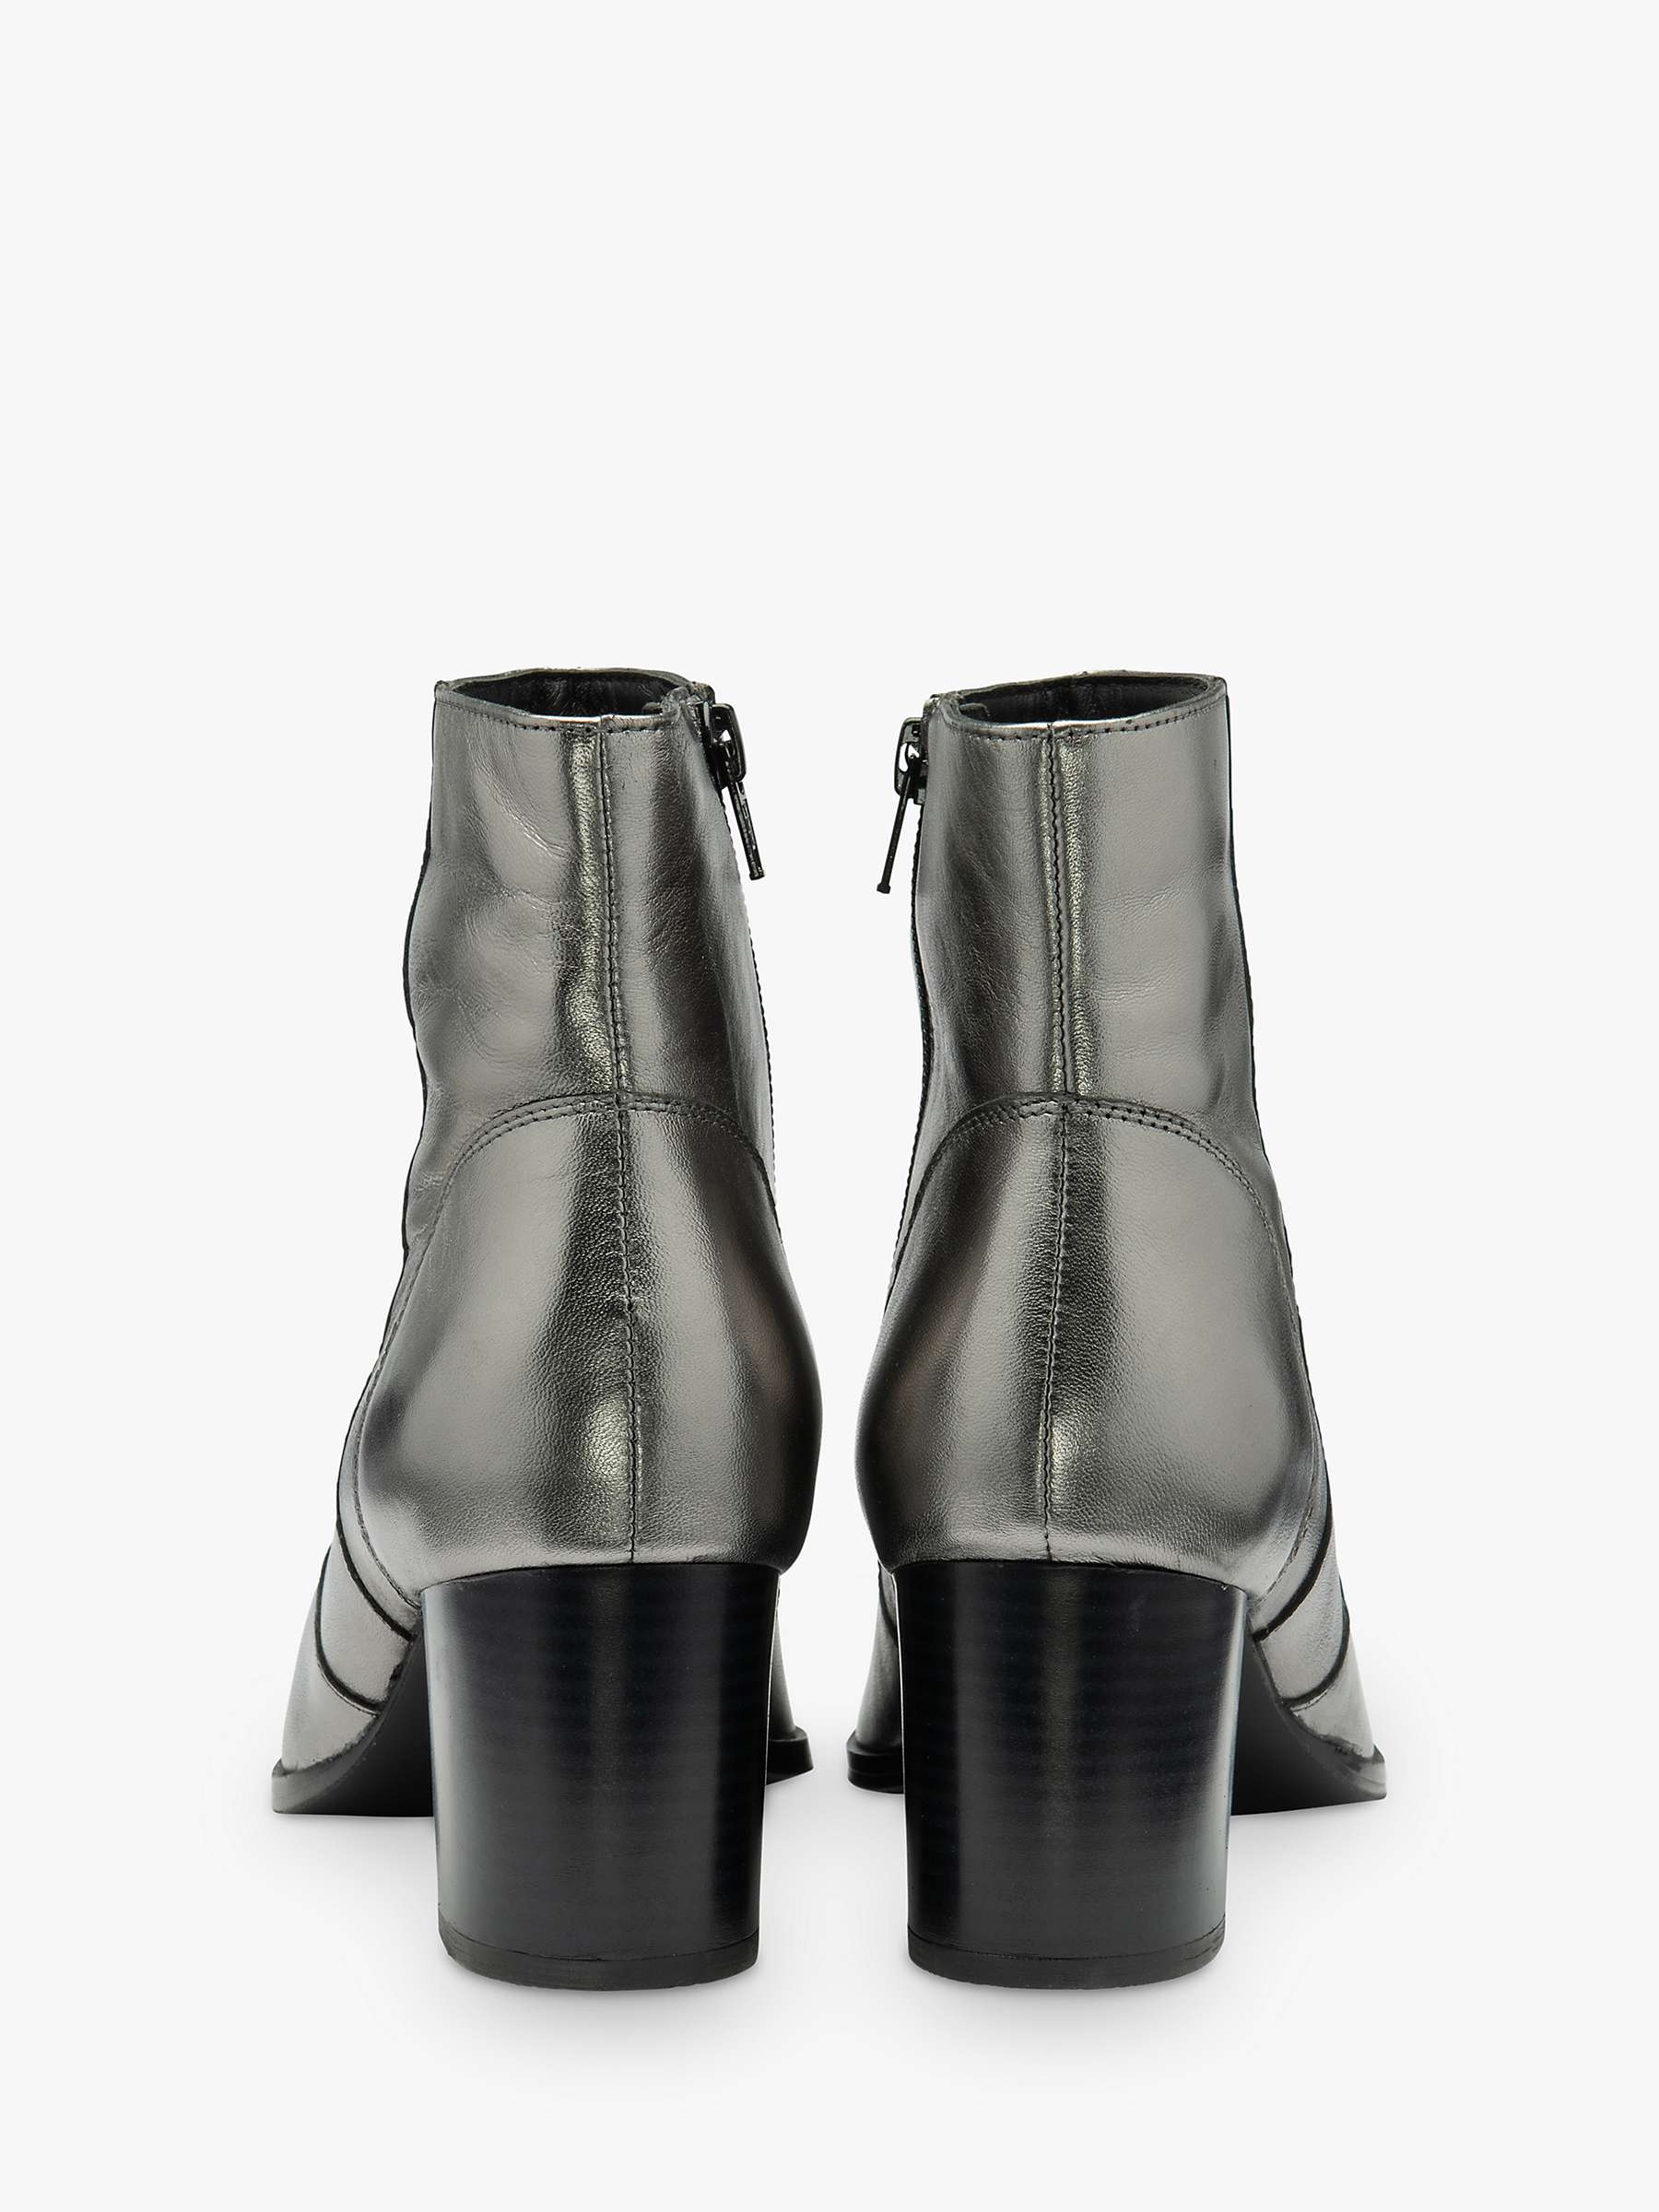 Buy Ravel Louth Leather Ankle Boots, Pewter Online at johnlewis.com